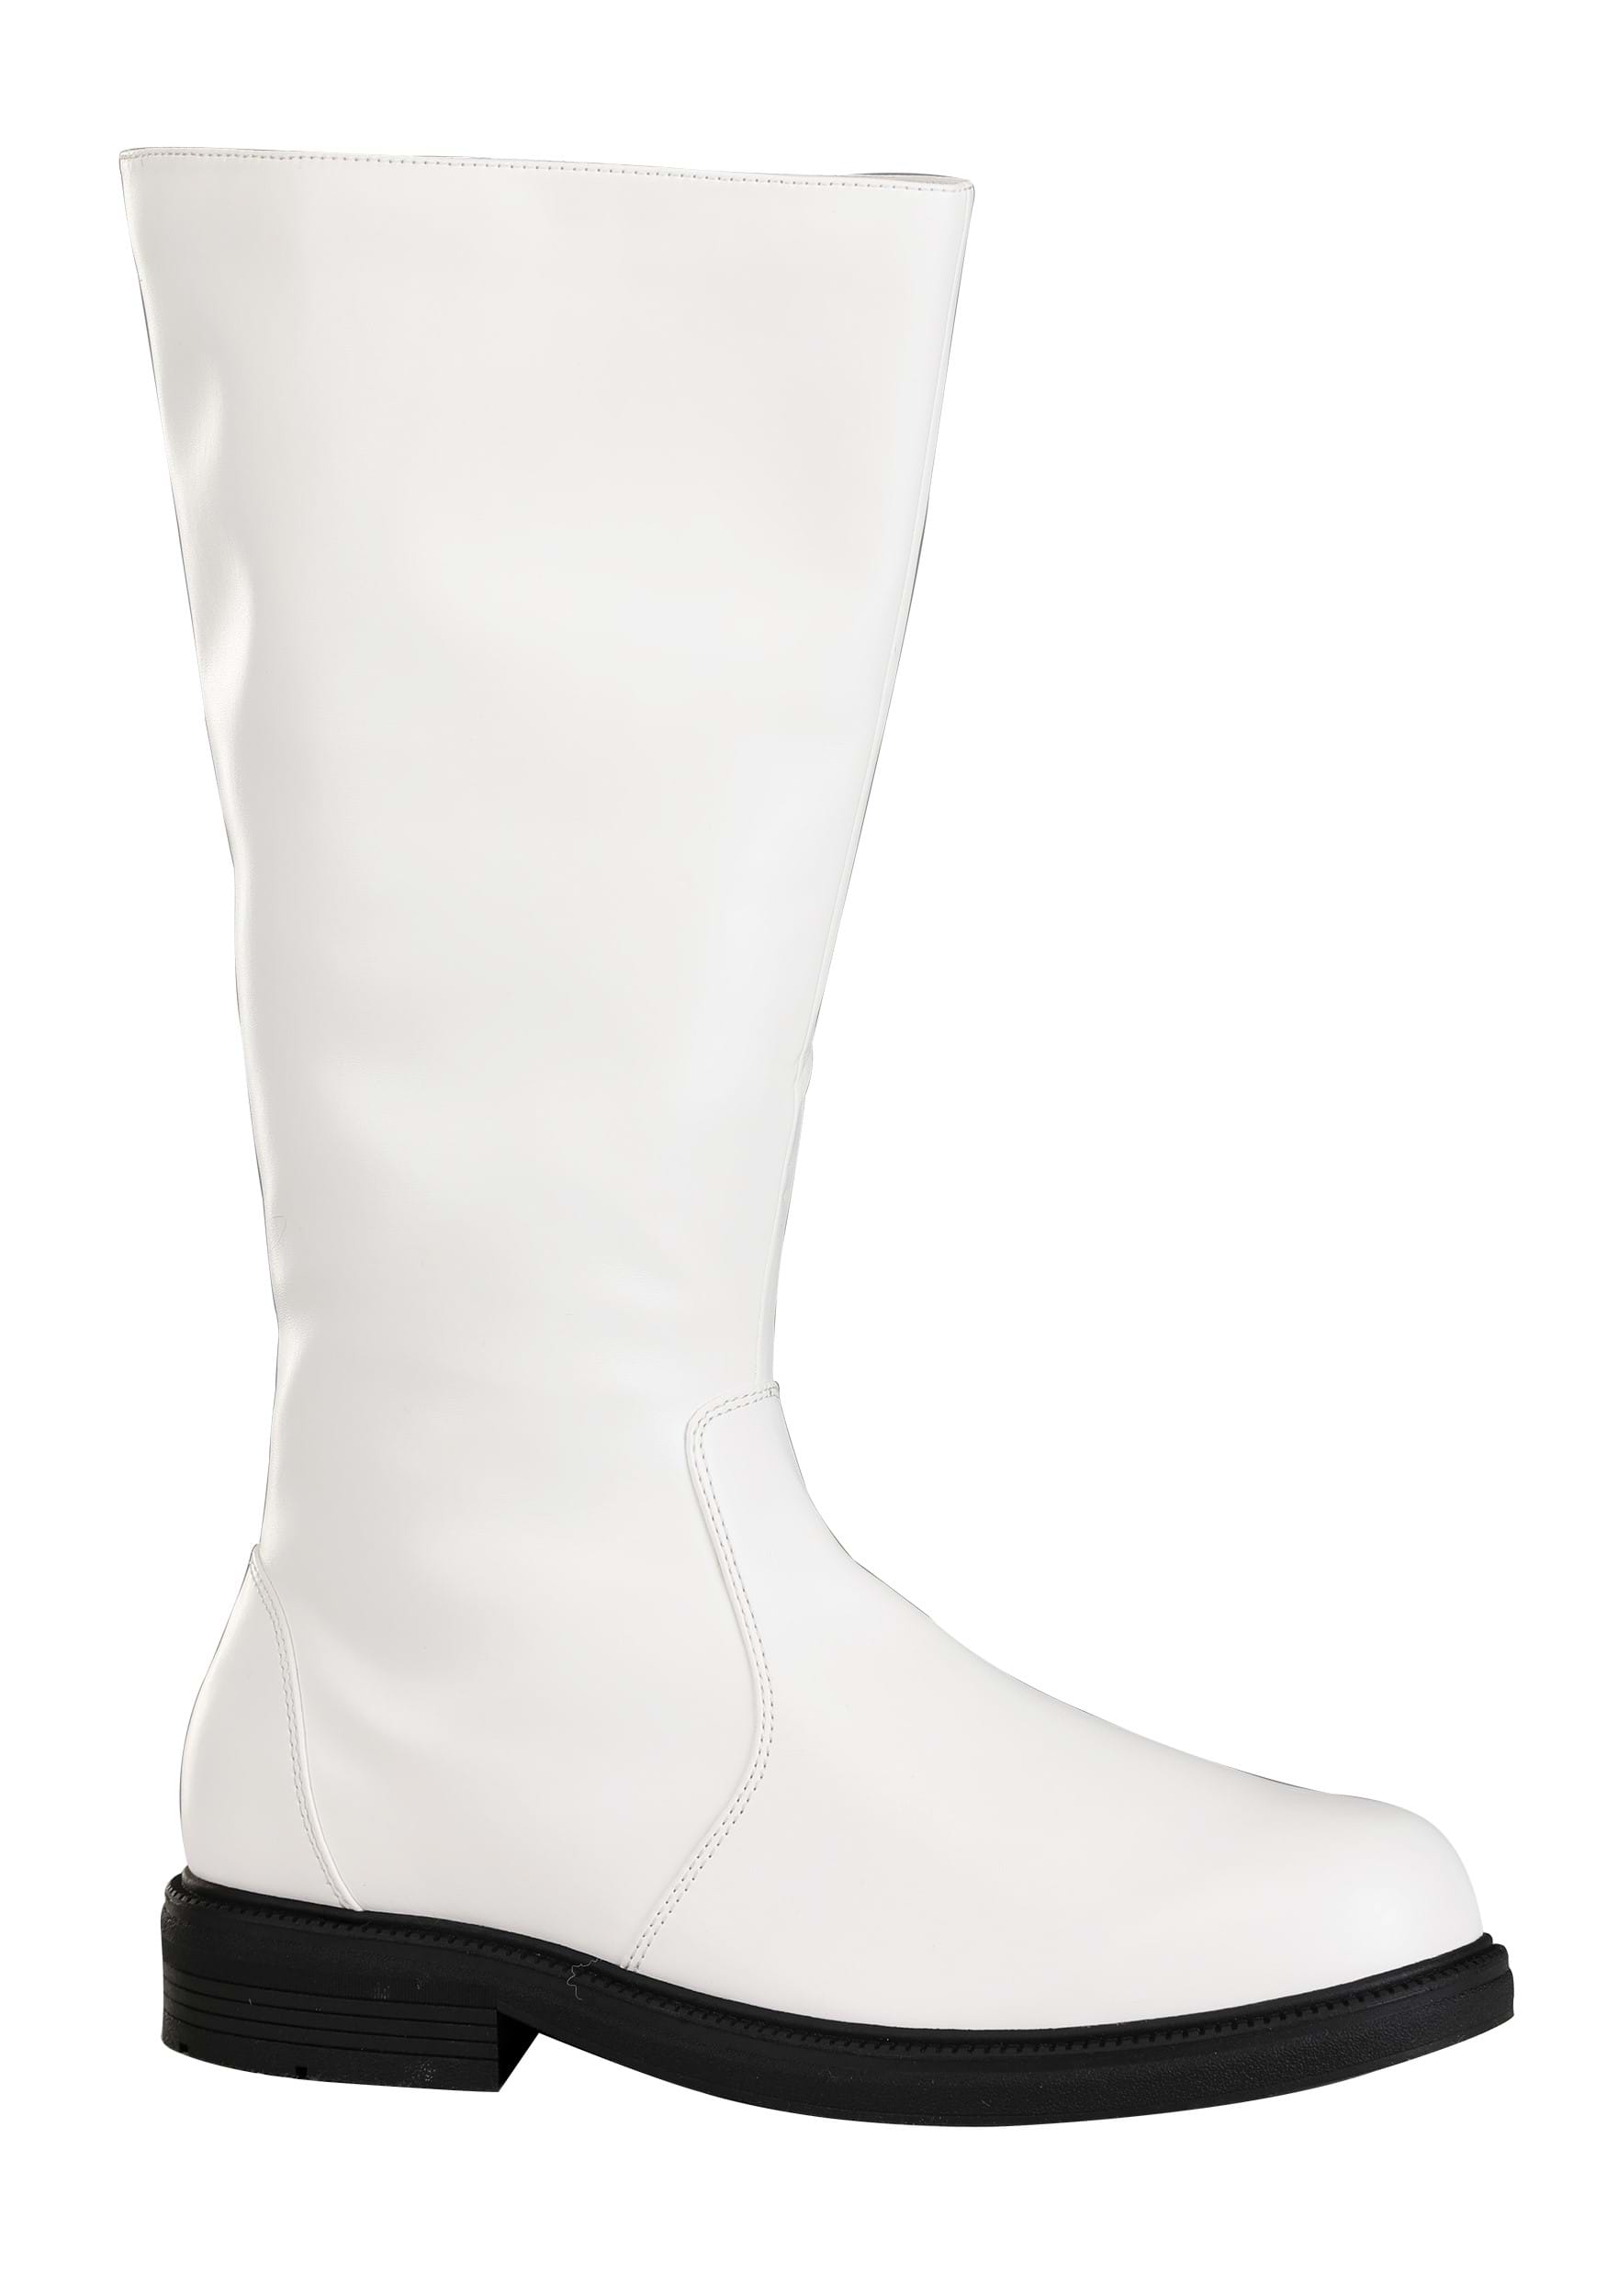 https://images.halloweencostumes.eu/products/74419/1-1/adult-tall-white-boots.jpg